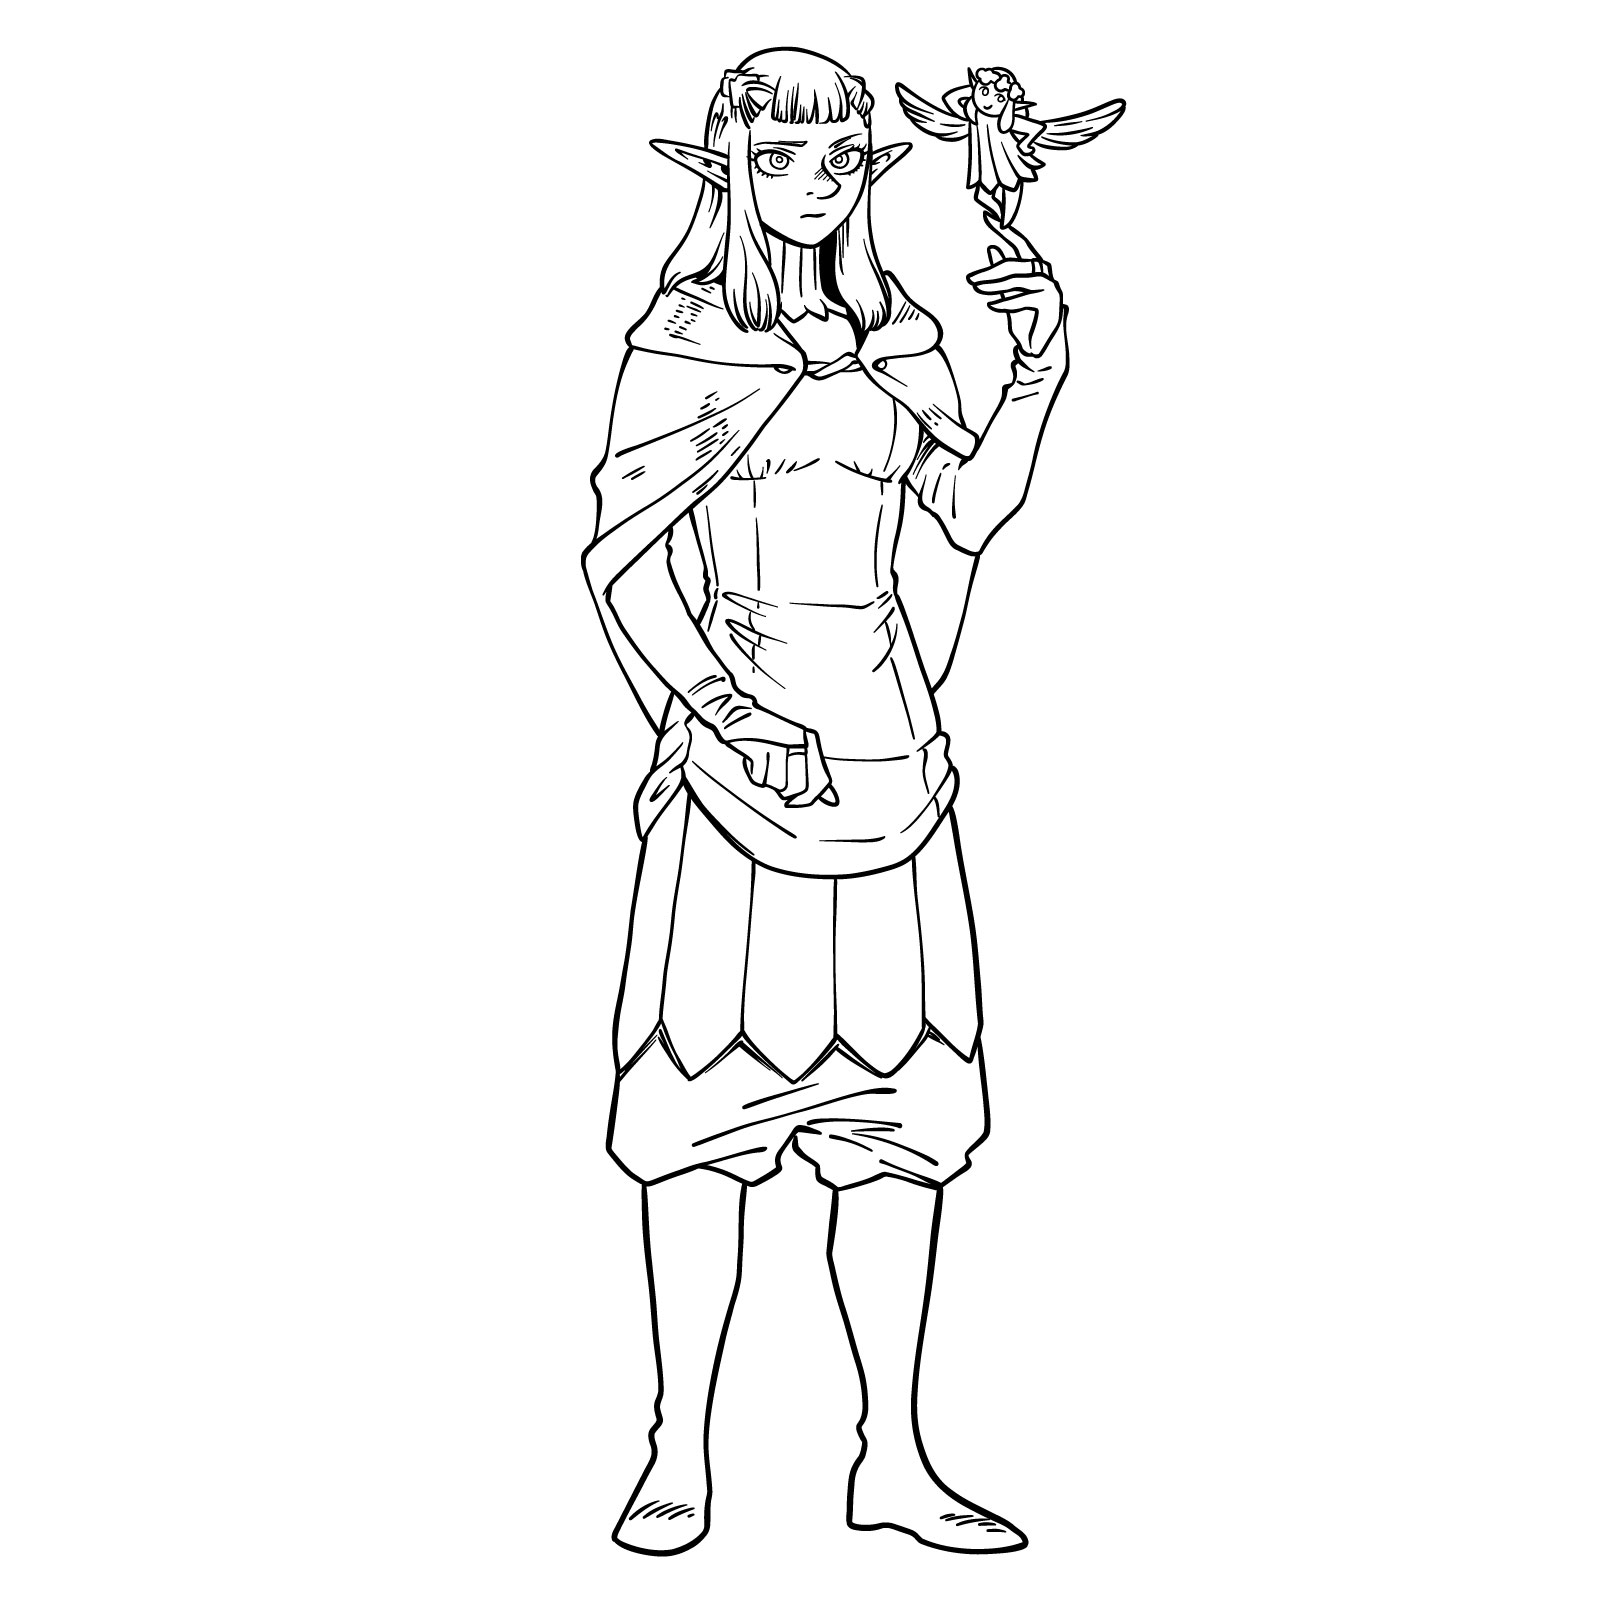 Easy drawing of Pattadol from Delicious in Dungeon - final step